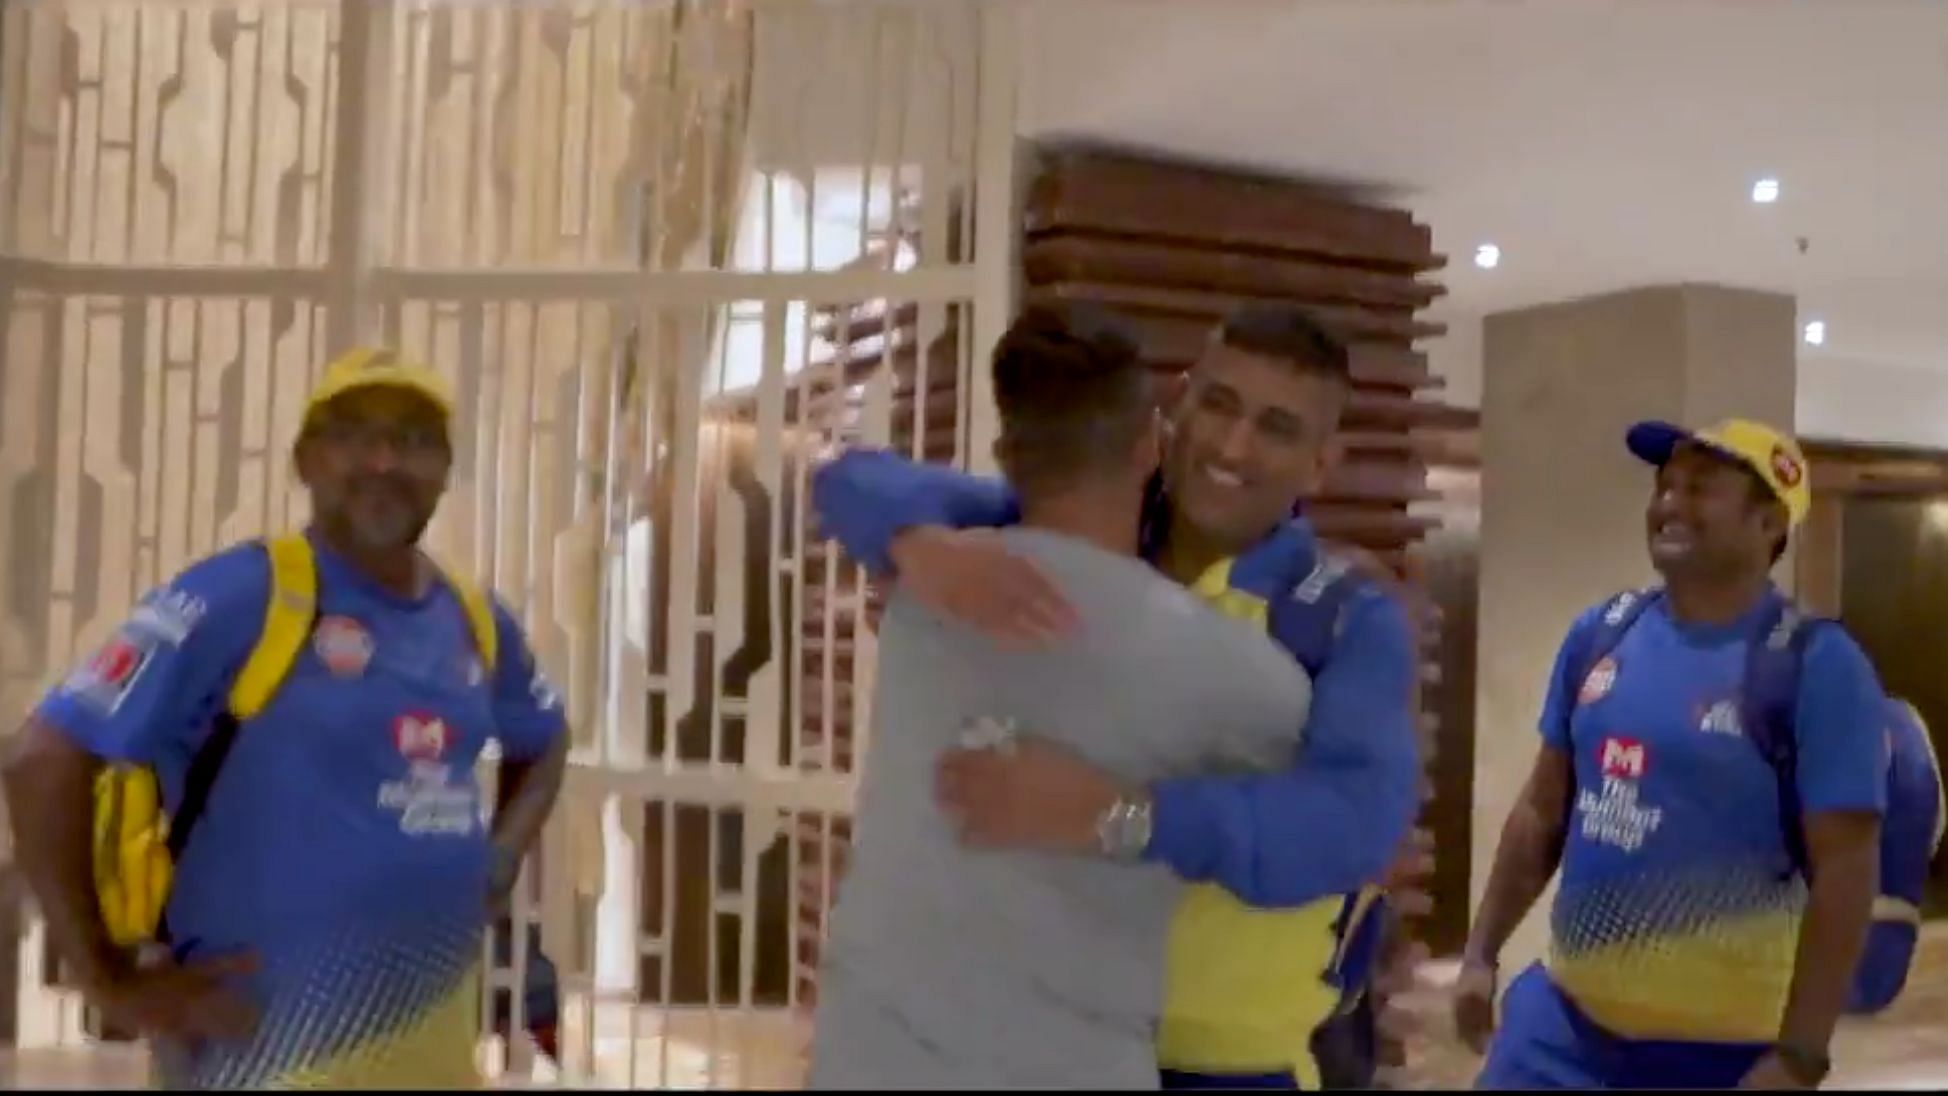 Suresh Raina and MS Dhoni reunited in the CSK team hotel as the team starts training for the 2020 IPL season.